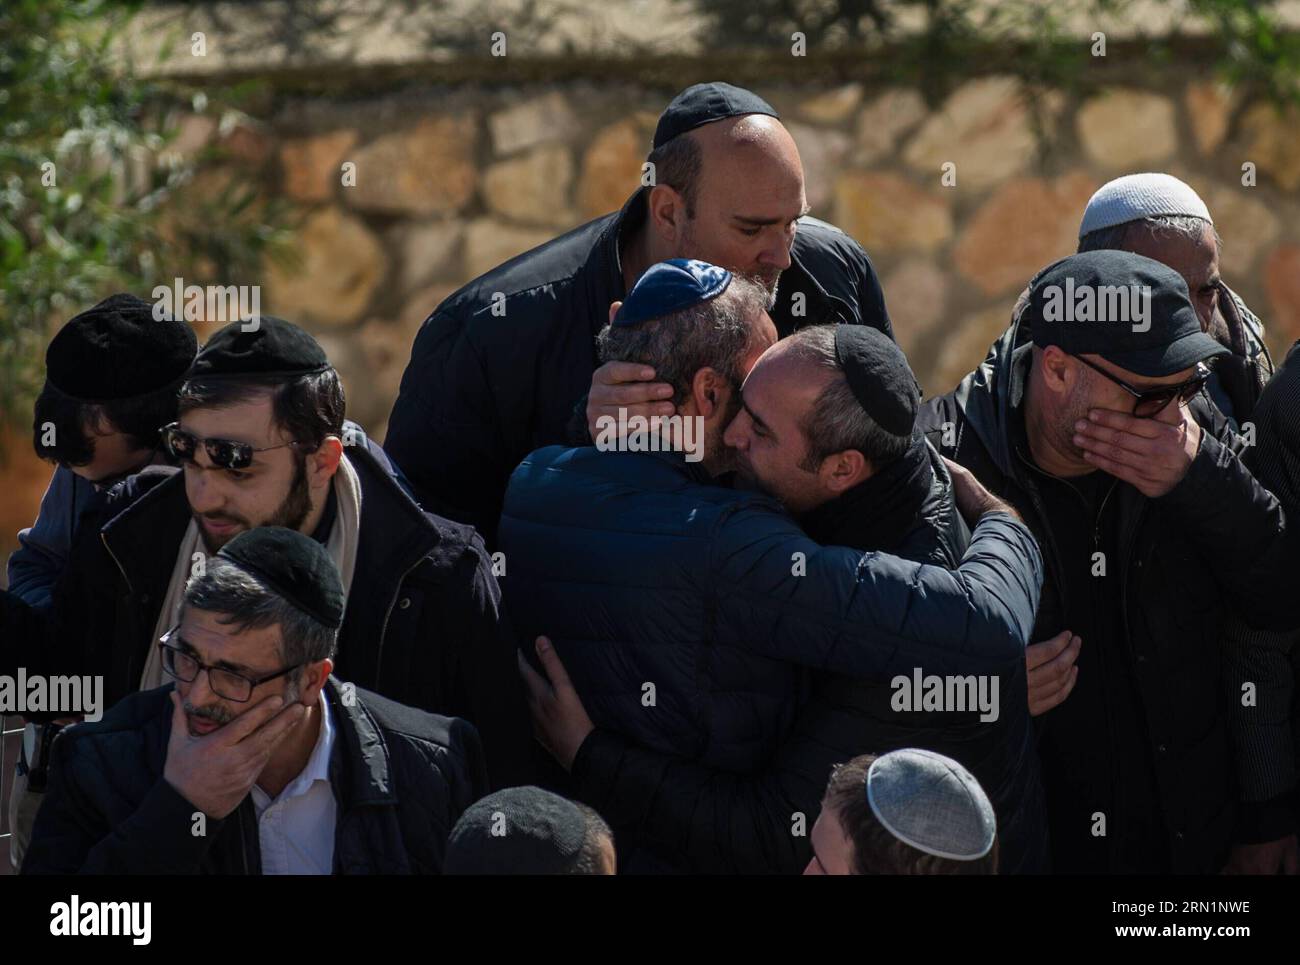 (150113) -- JERUSALEM, Jan. 13, 2015 -- People embrace each other during a funeral ceremony for the four victims of Paris supermarket attack at Givat Shaul cemetery, on the outskirts of Jerusalem, on Jan. 13, 2015. Israeli leaders and multitude of mourners gathered Tuesday with the families of four Jewish victims of last week s terror attack on a Paris kosher supermarket for a solemn funeral ceremony at a Jerusalem cemetery. Yoav Hattab, Yohan Cohen, Philippe Braham and Francois-Michel Saada, were gunned down on Friday during a hostage attack on Hyper Casher supermarket in eastern Paris. They Stock Photo